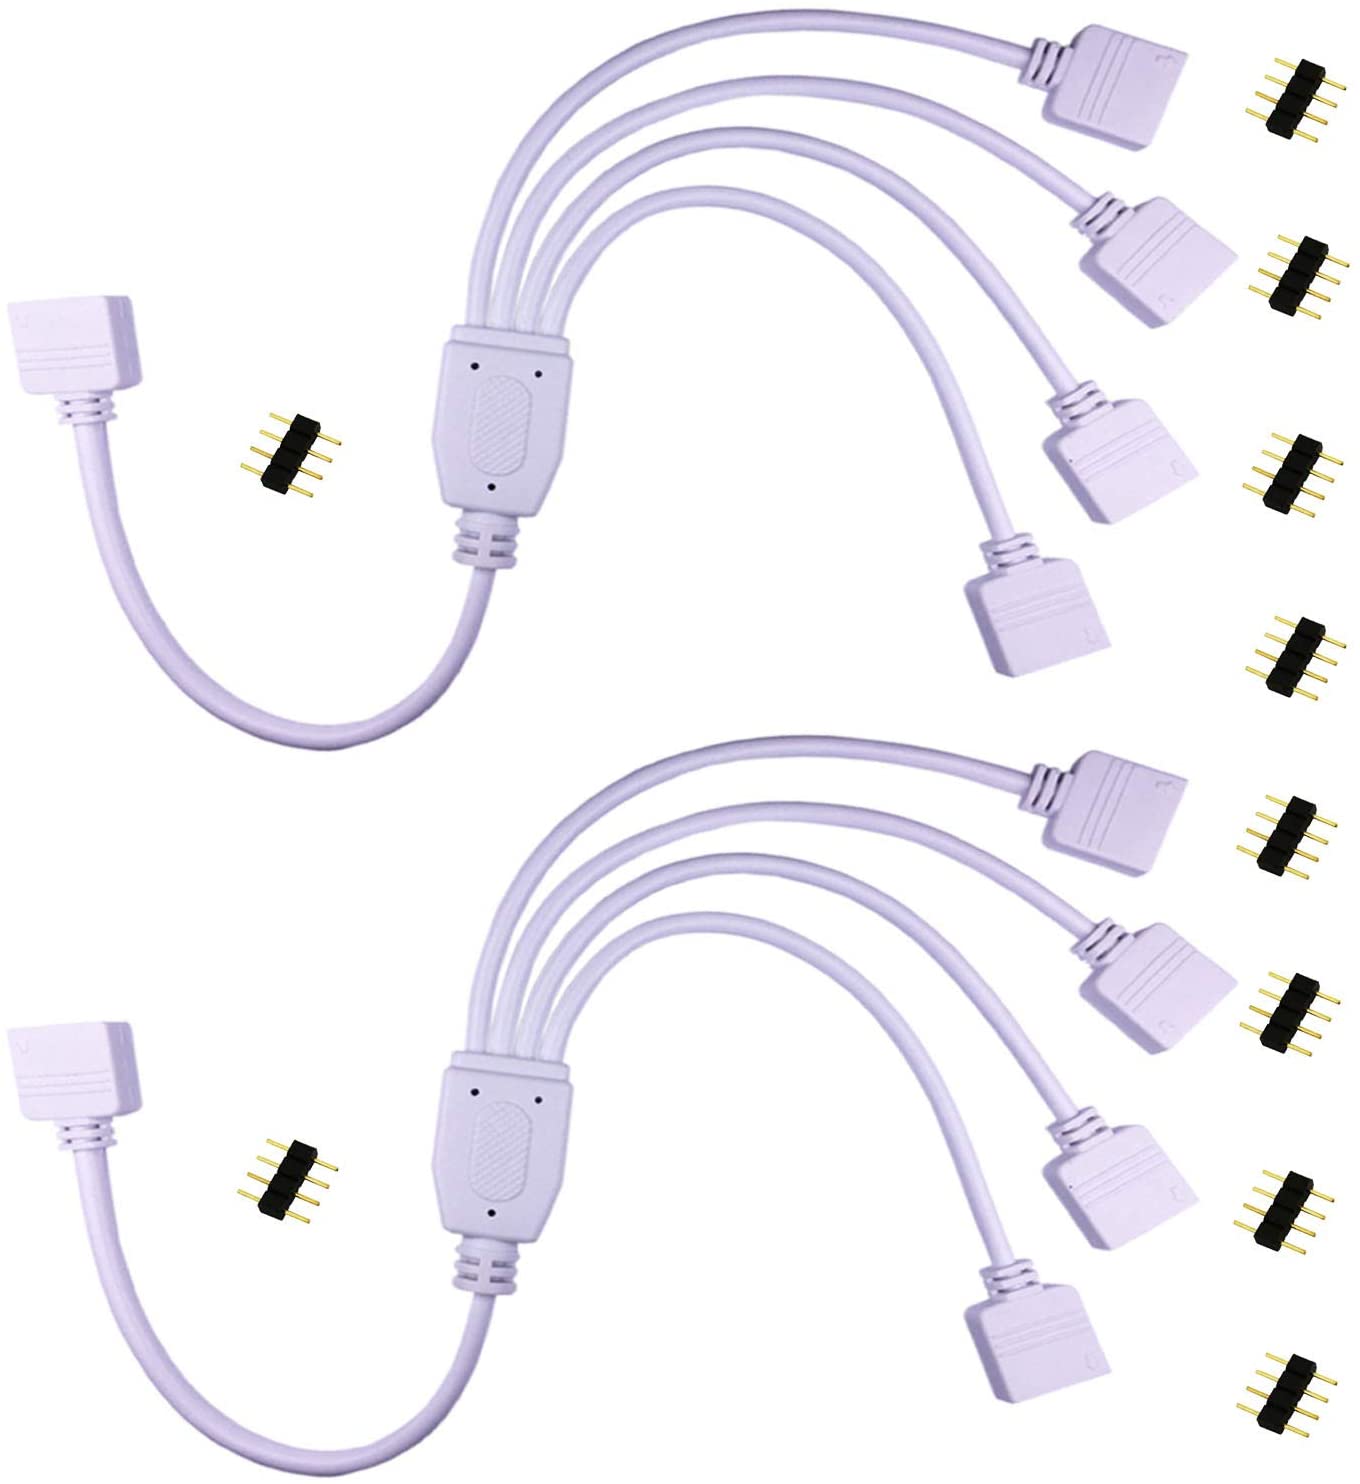 1 to 4 Ports Female/Male Connection Cable 4 Pin Splitter Cable - ATOM LED